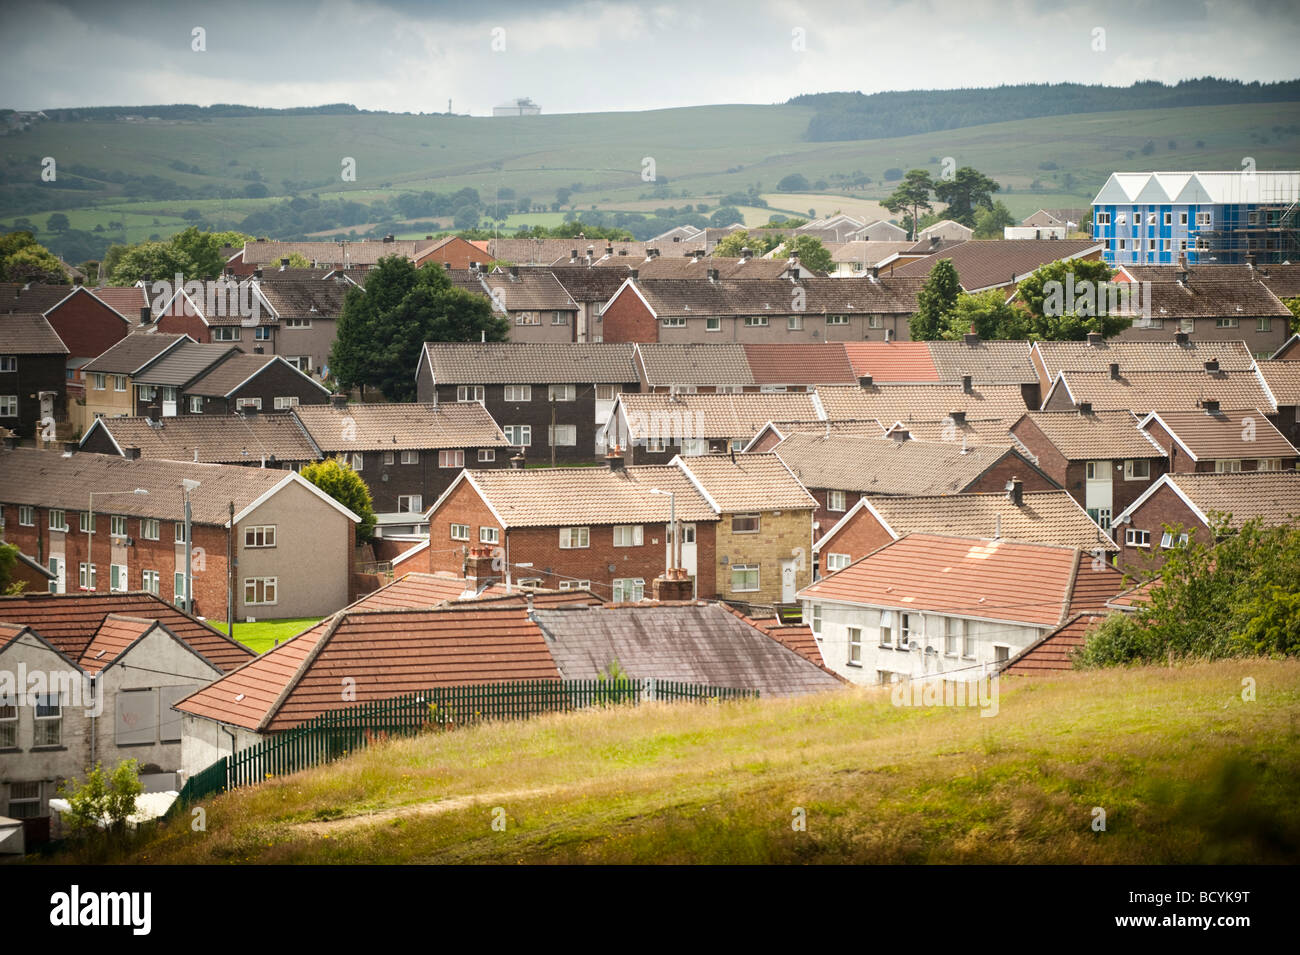 The Gurnos council housing estate on the outskirts of Merthyr Tydfil South Wales UK Stock Photo